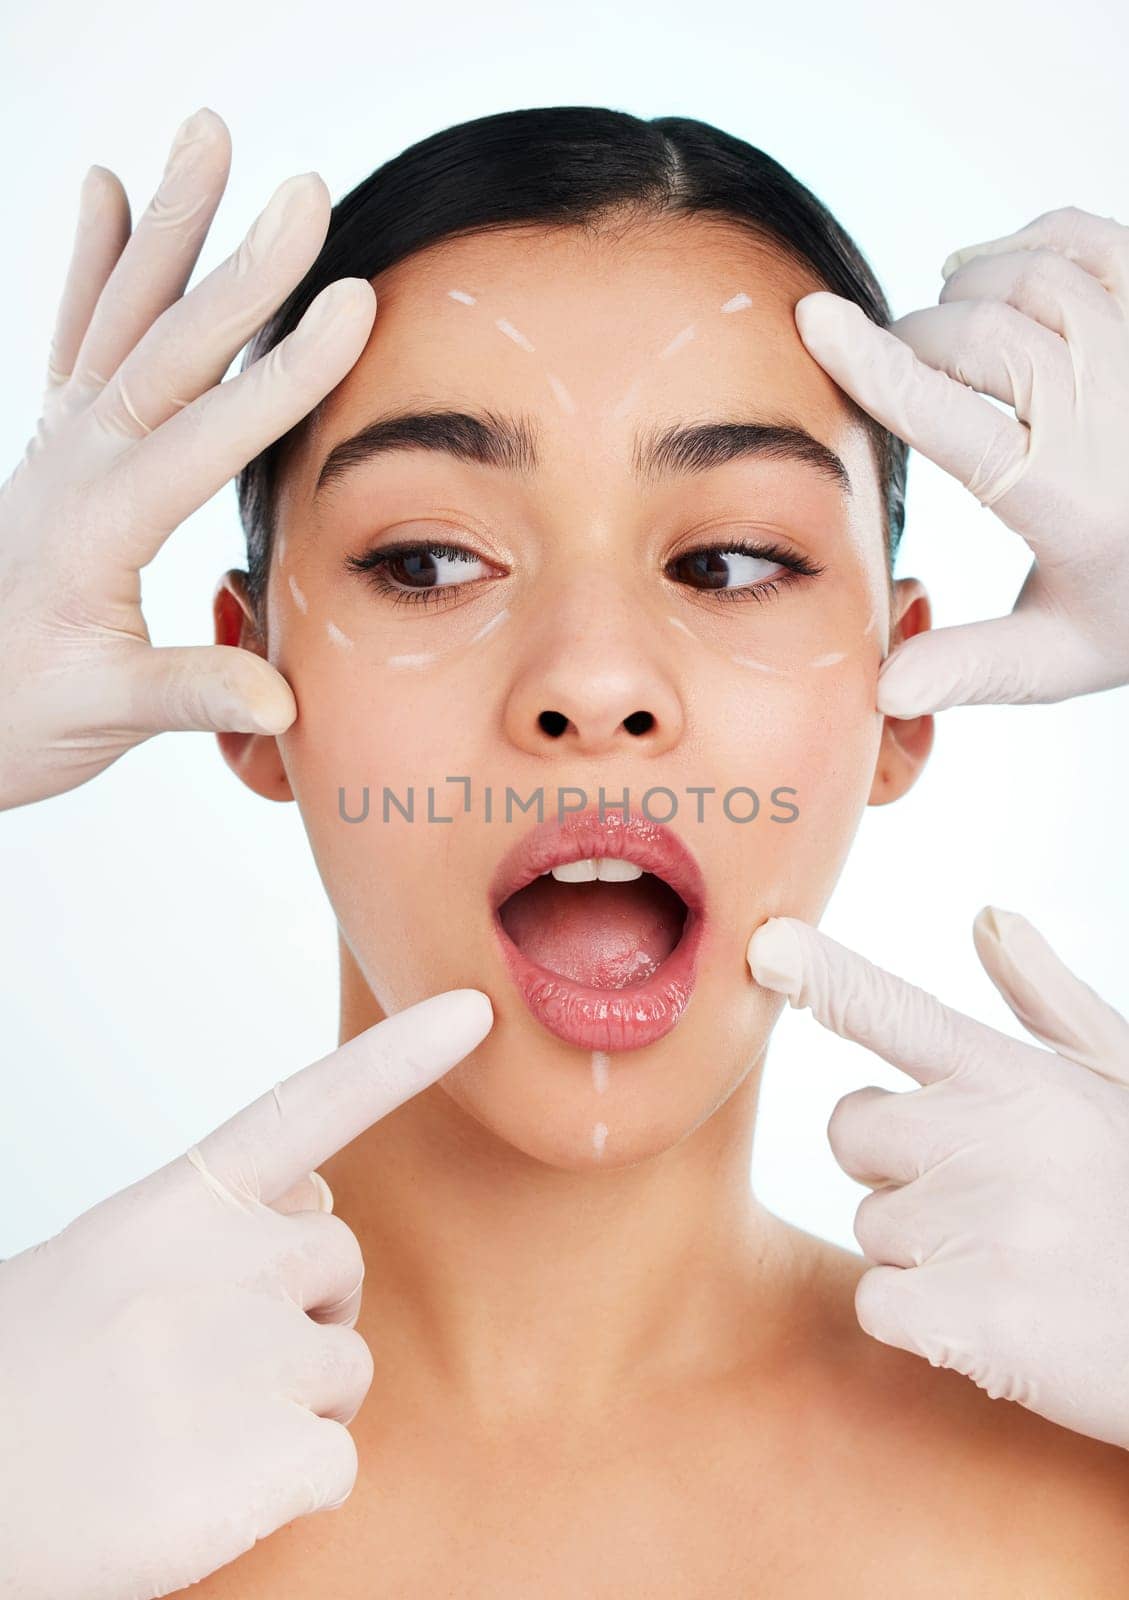 Many hands make light work. Studio shot of an attractive young woman having some plastic surgery done against a light background